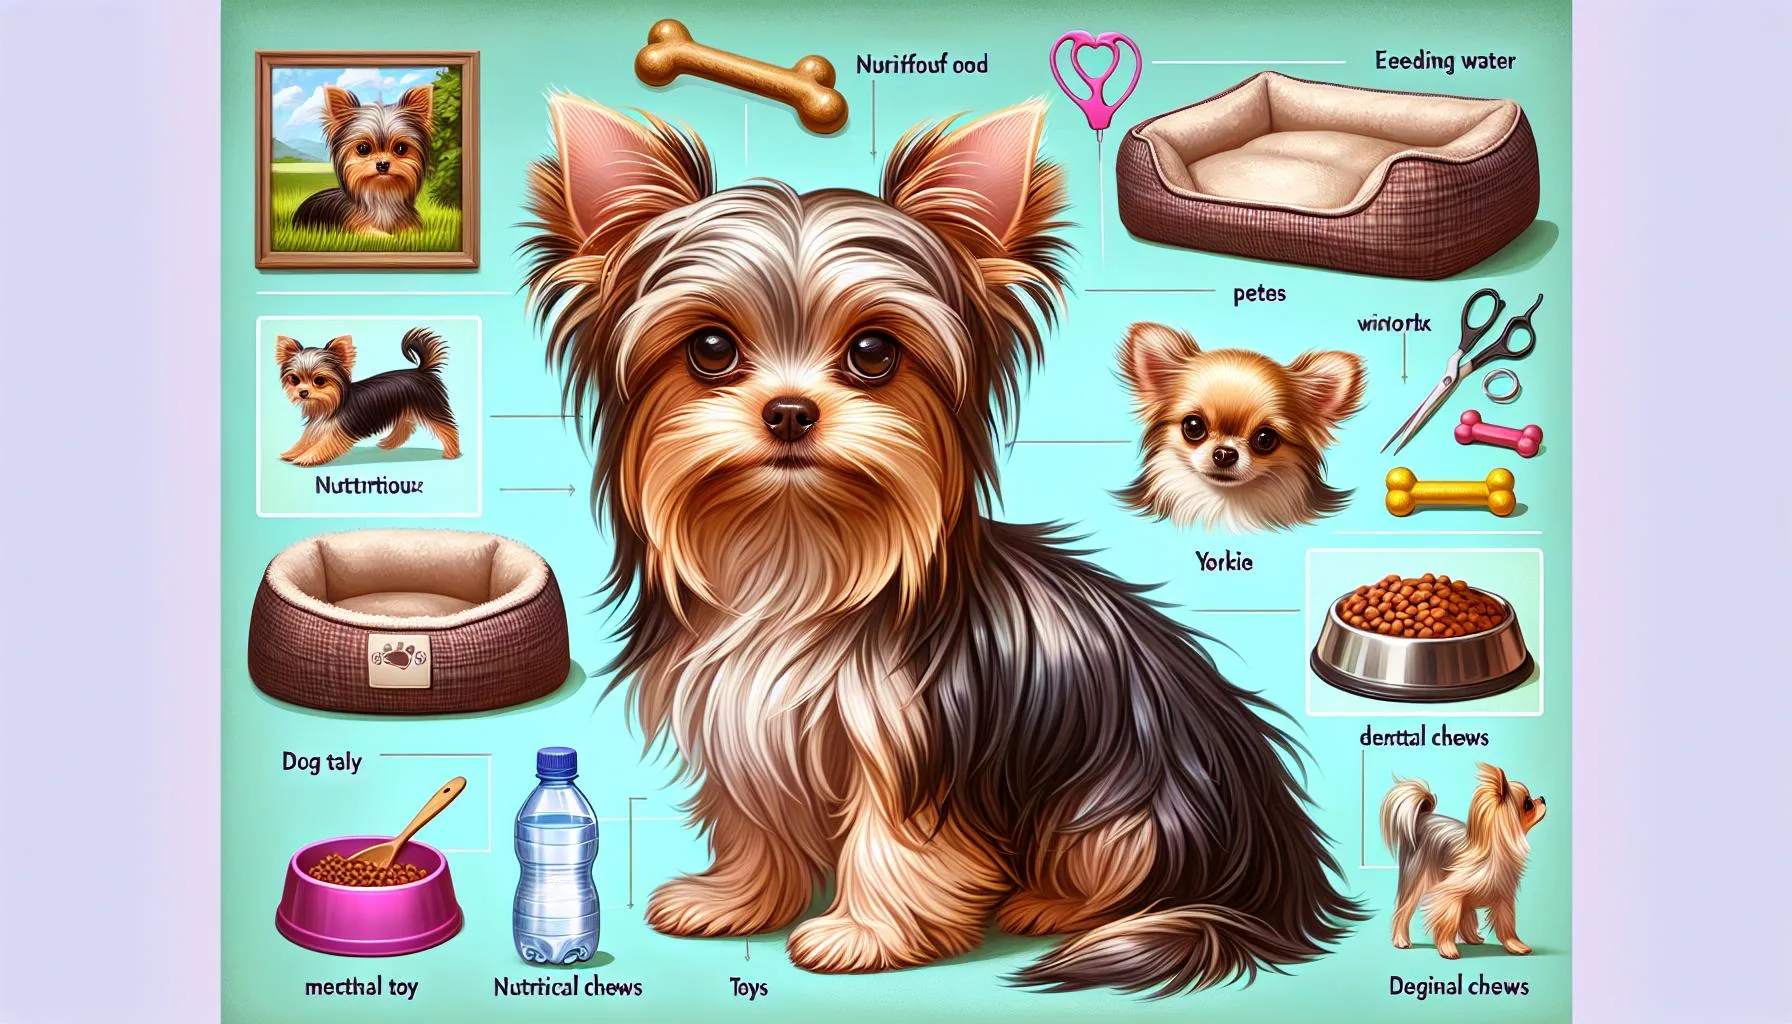 See How Adorable a Yorkie-Chihuahua Mix Can Be!